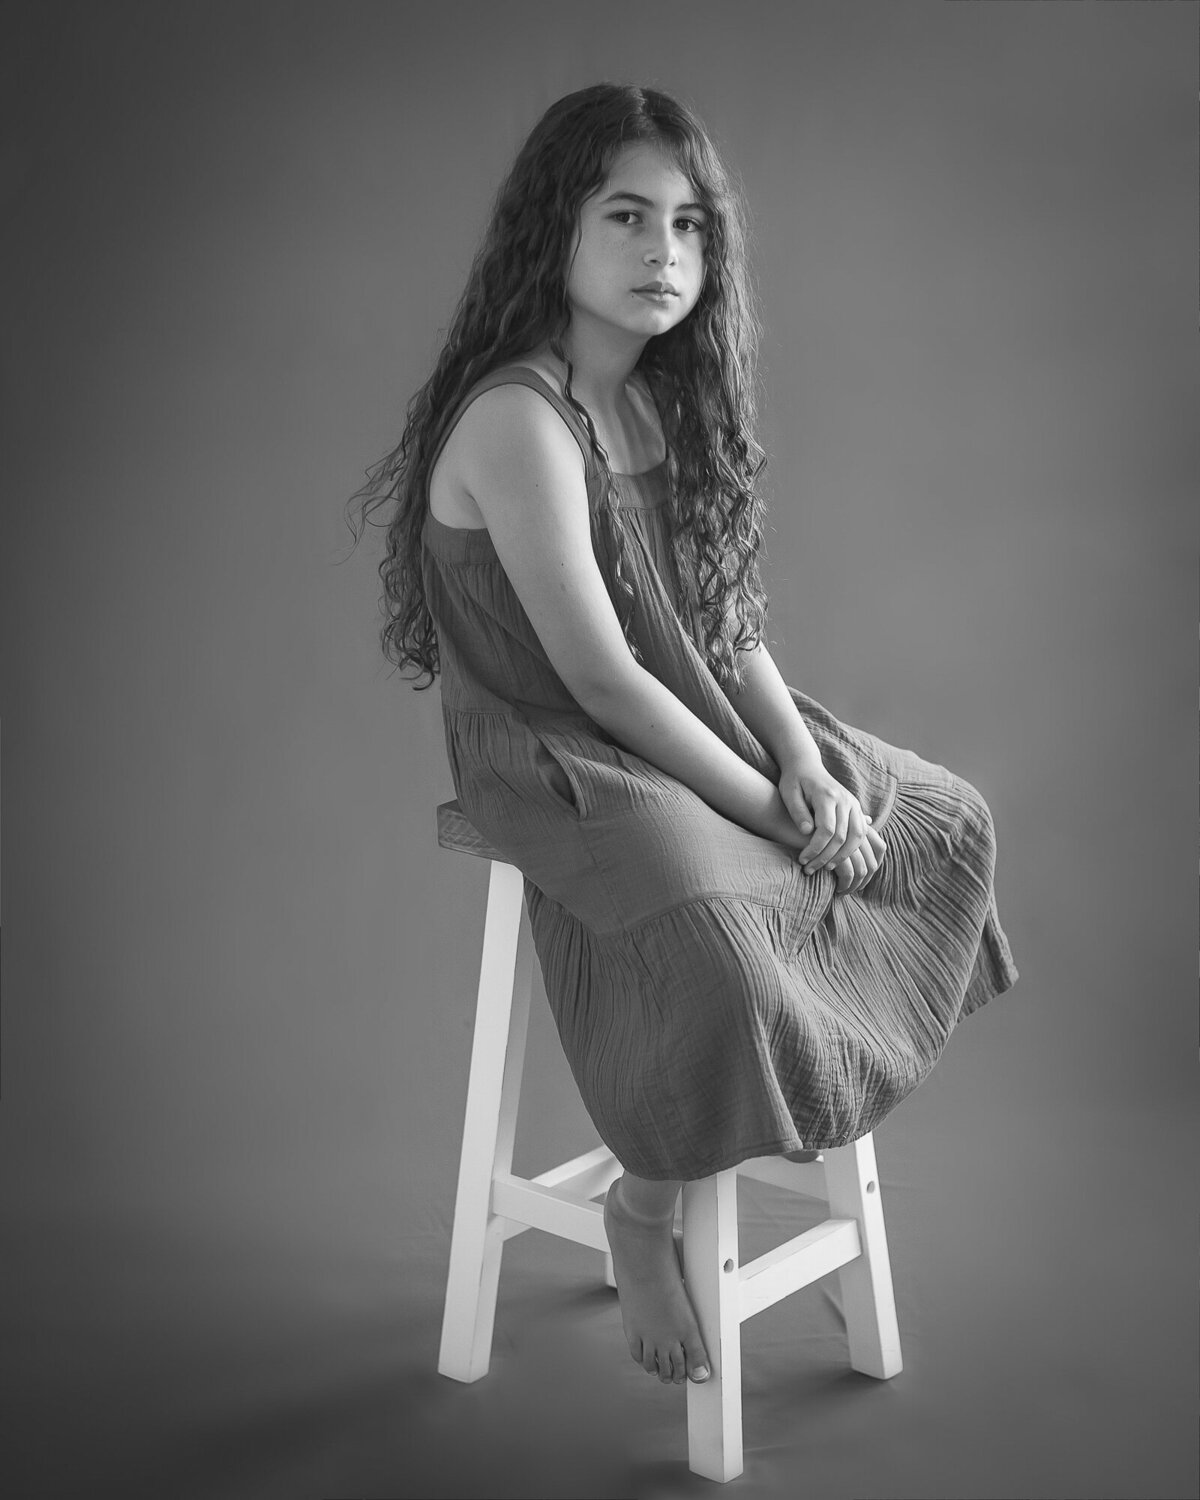 gorgeous black and white portrait of girl on a stool looks almost whimsical or etherial